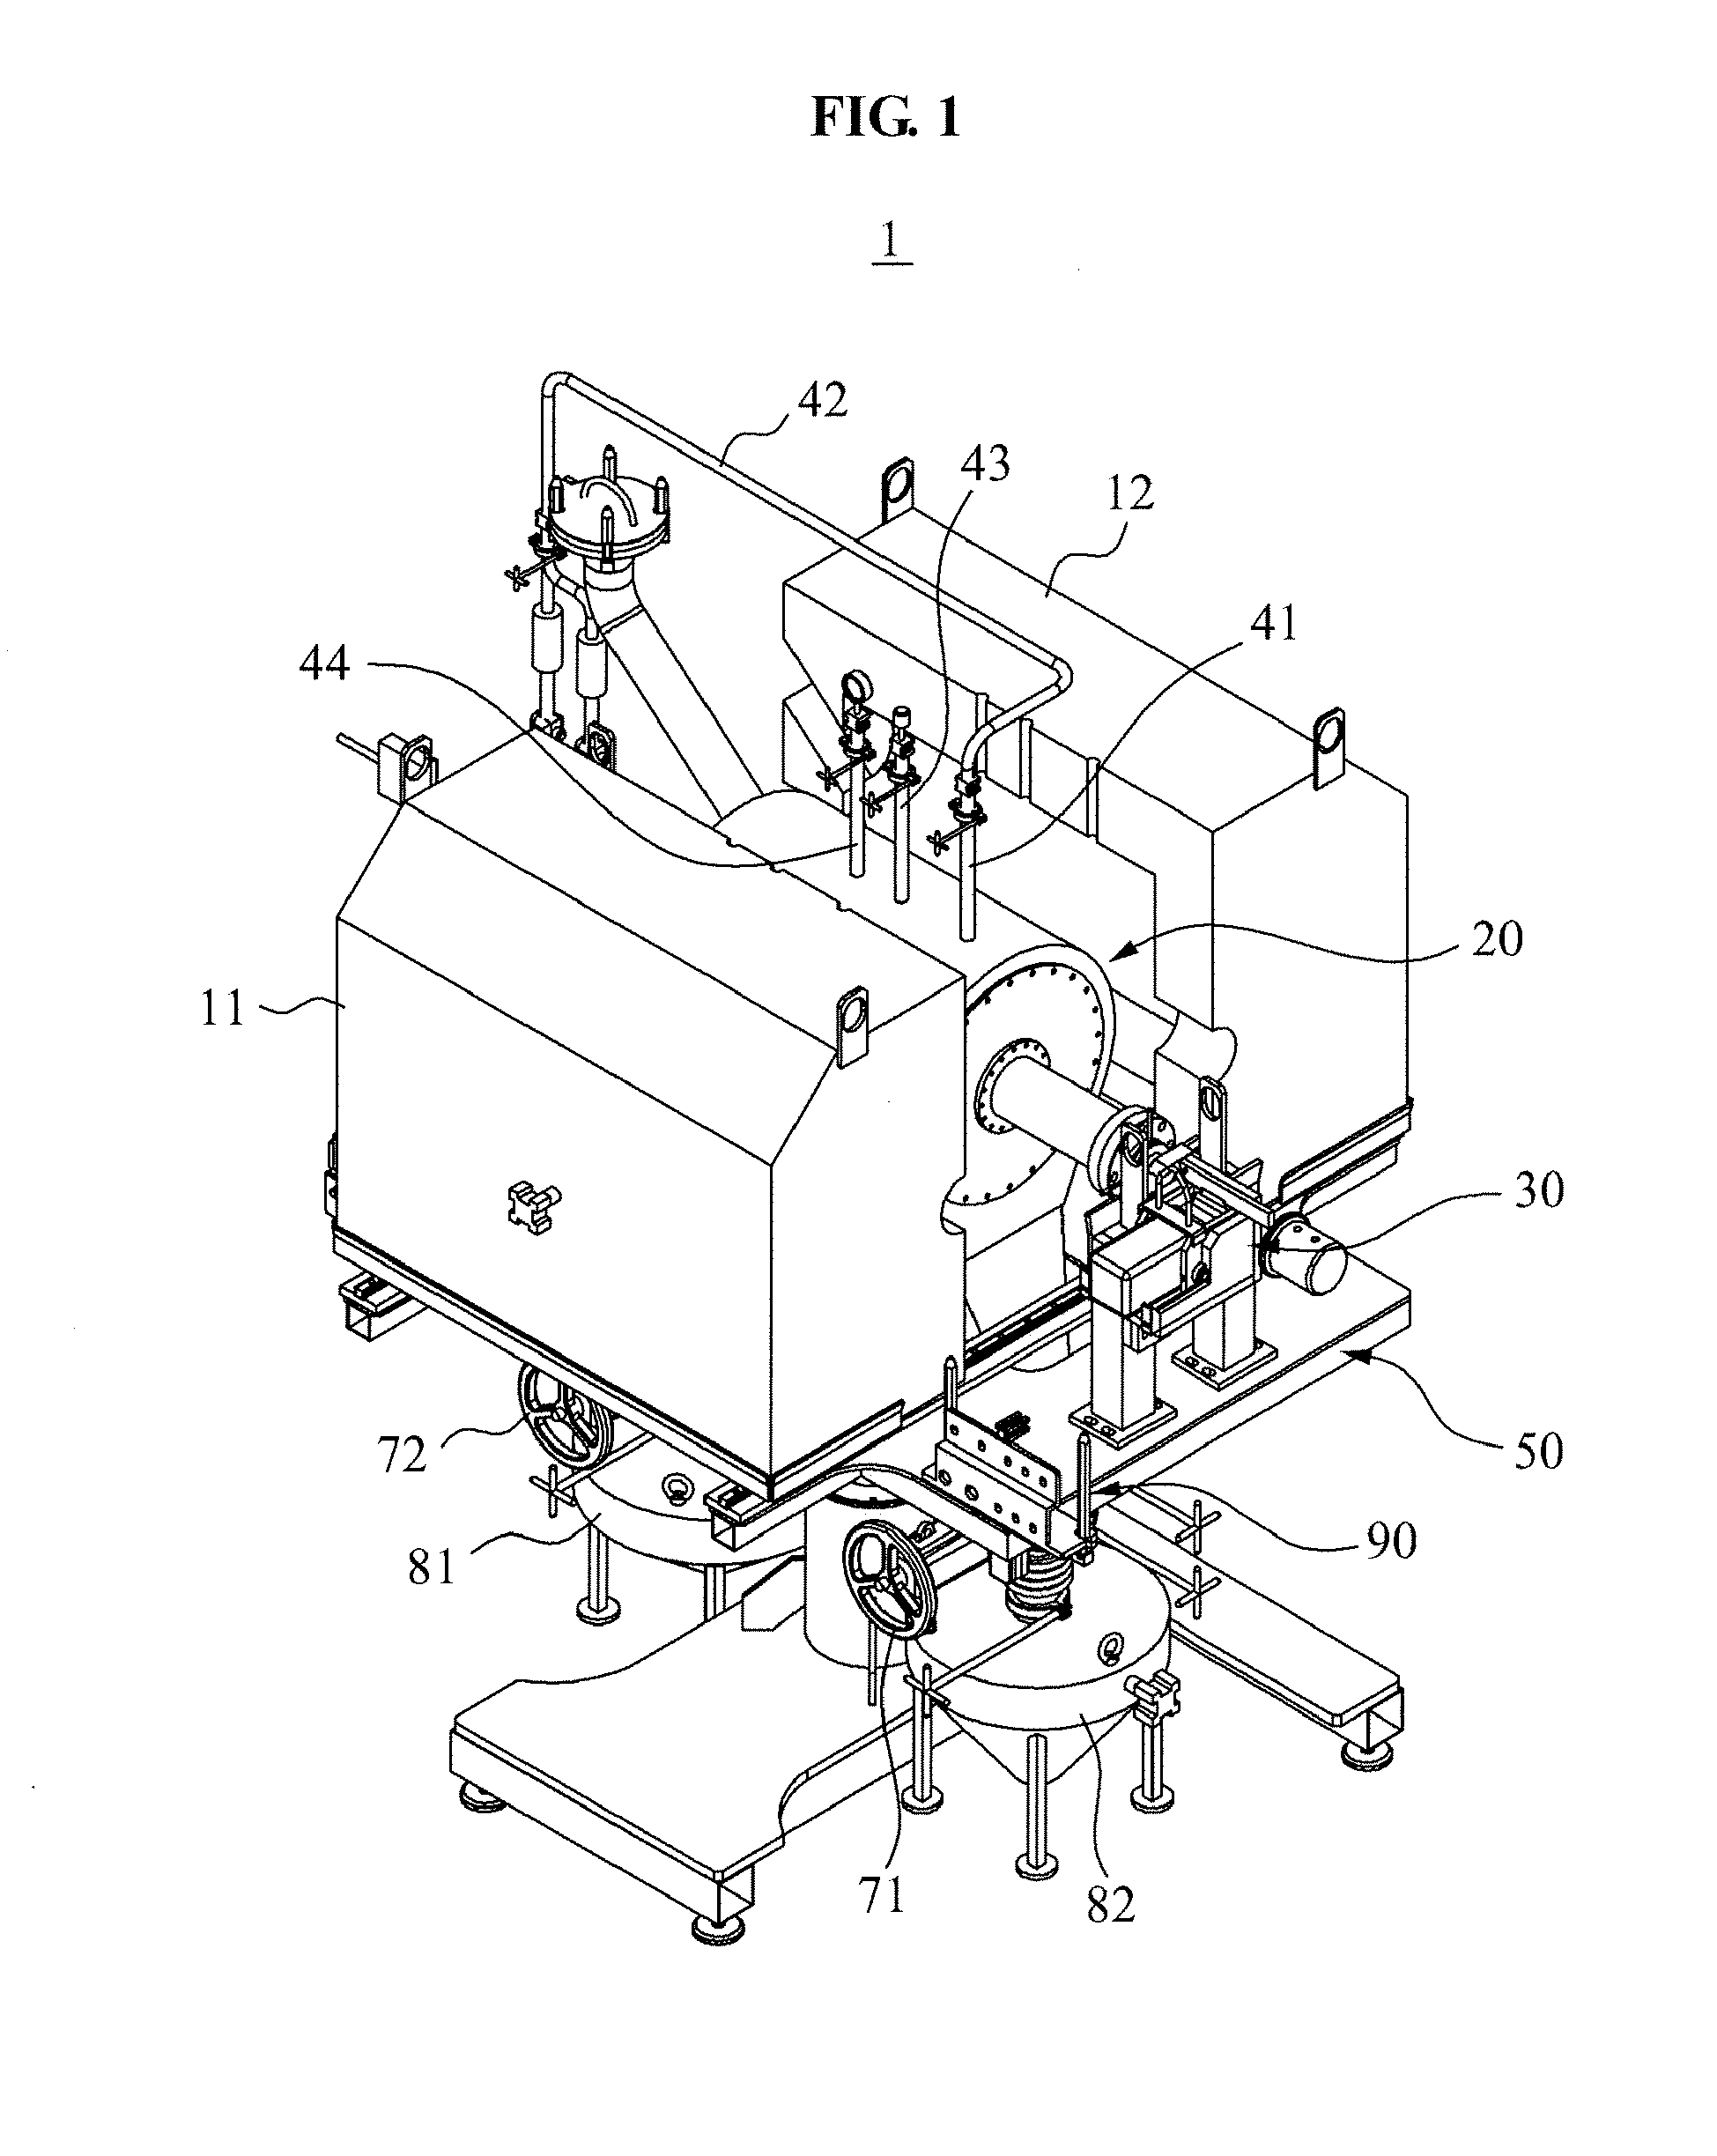 Prefabricated vol-oxidizer for spent nuclear fuel for convenient operation and maintenance